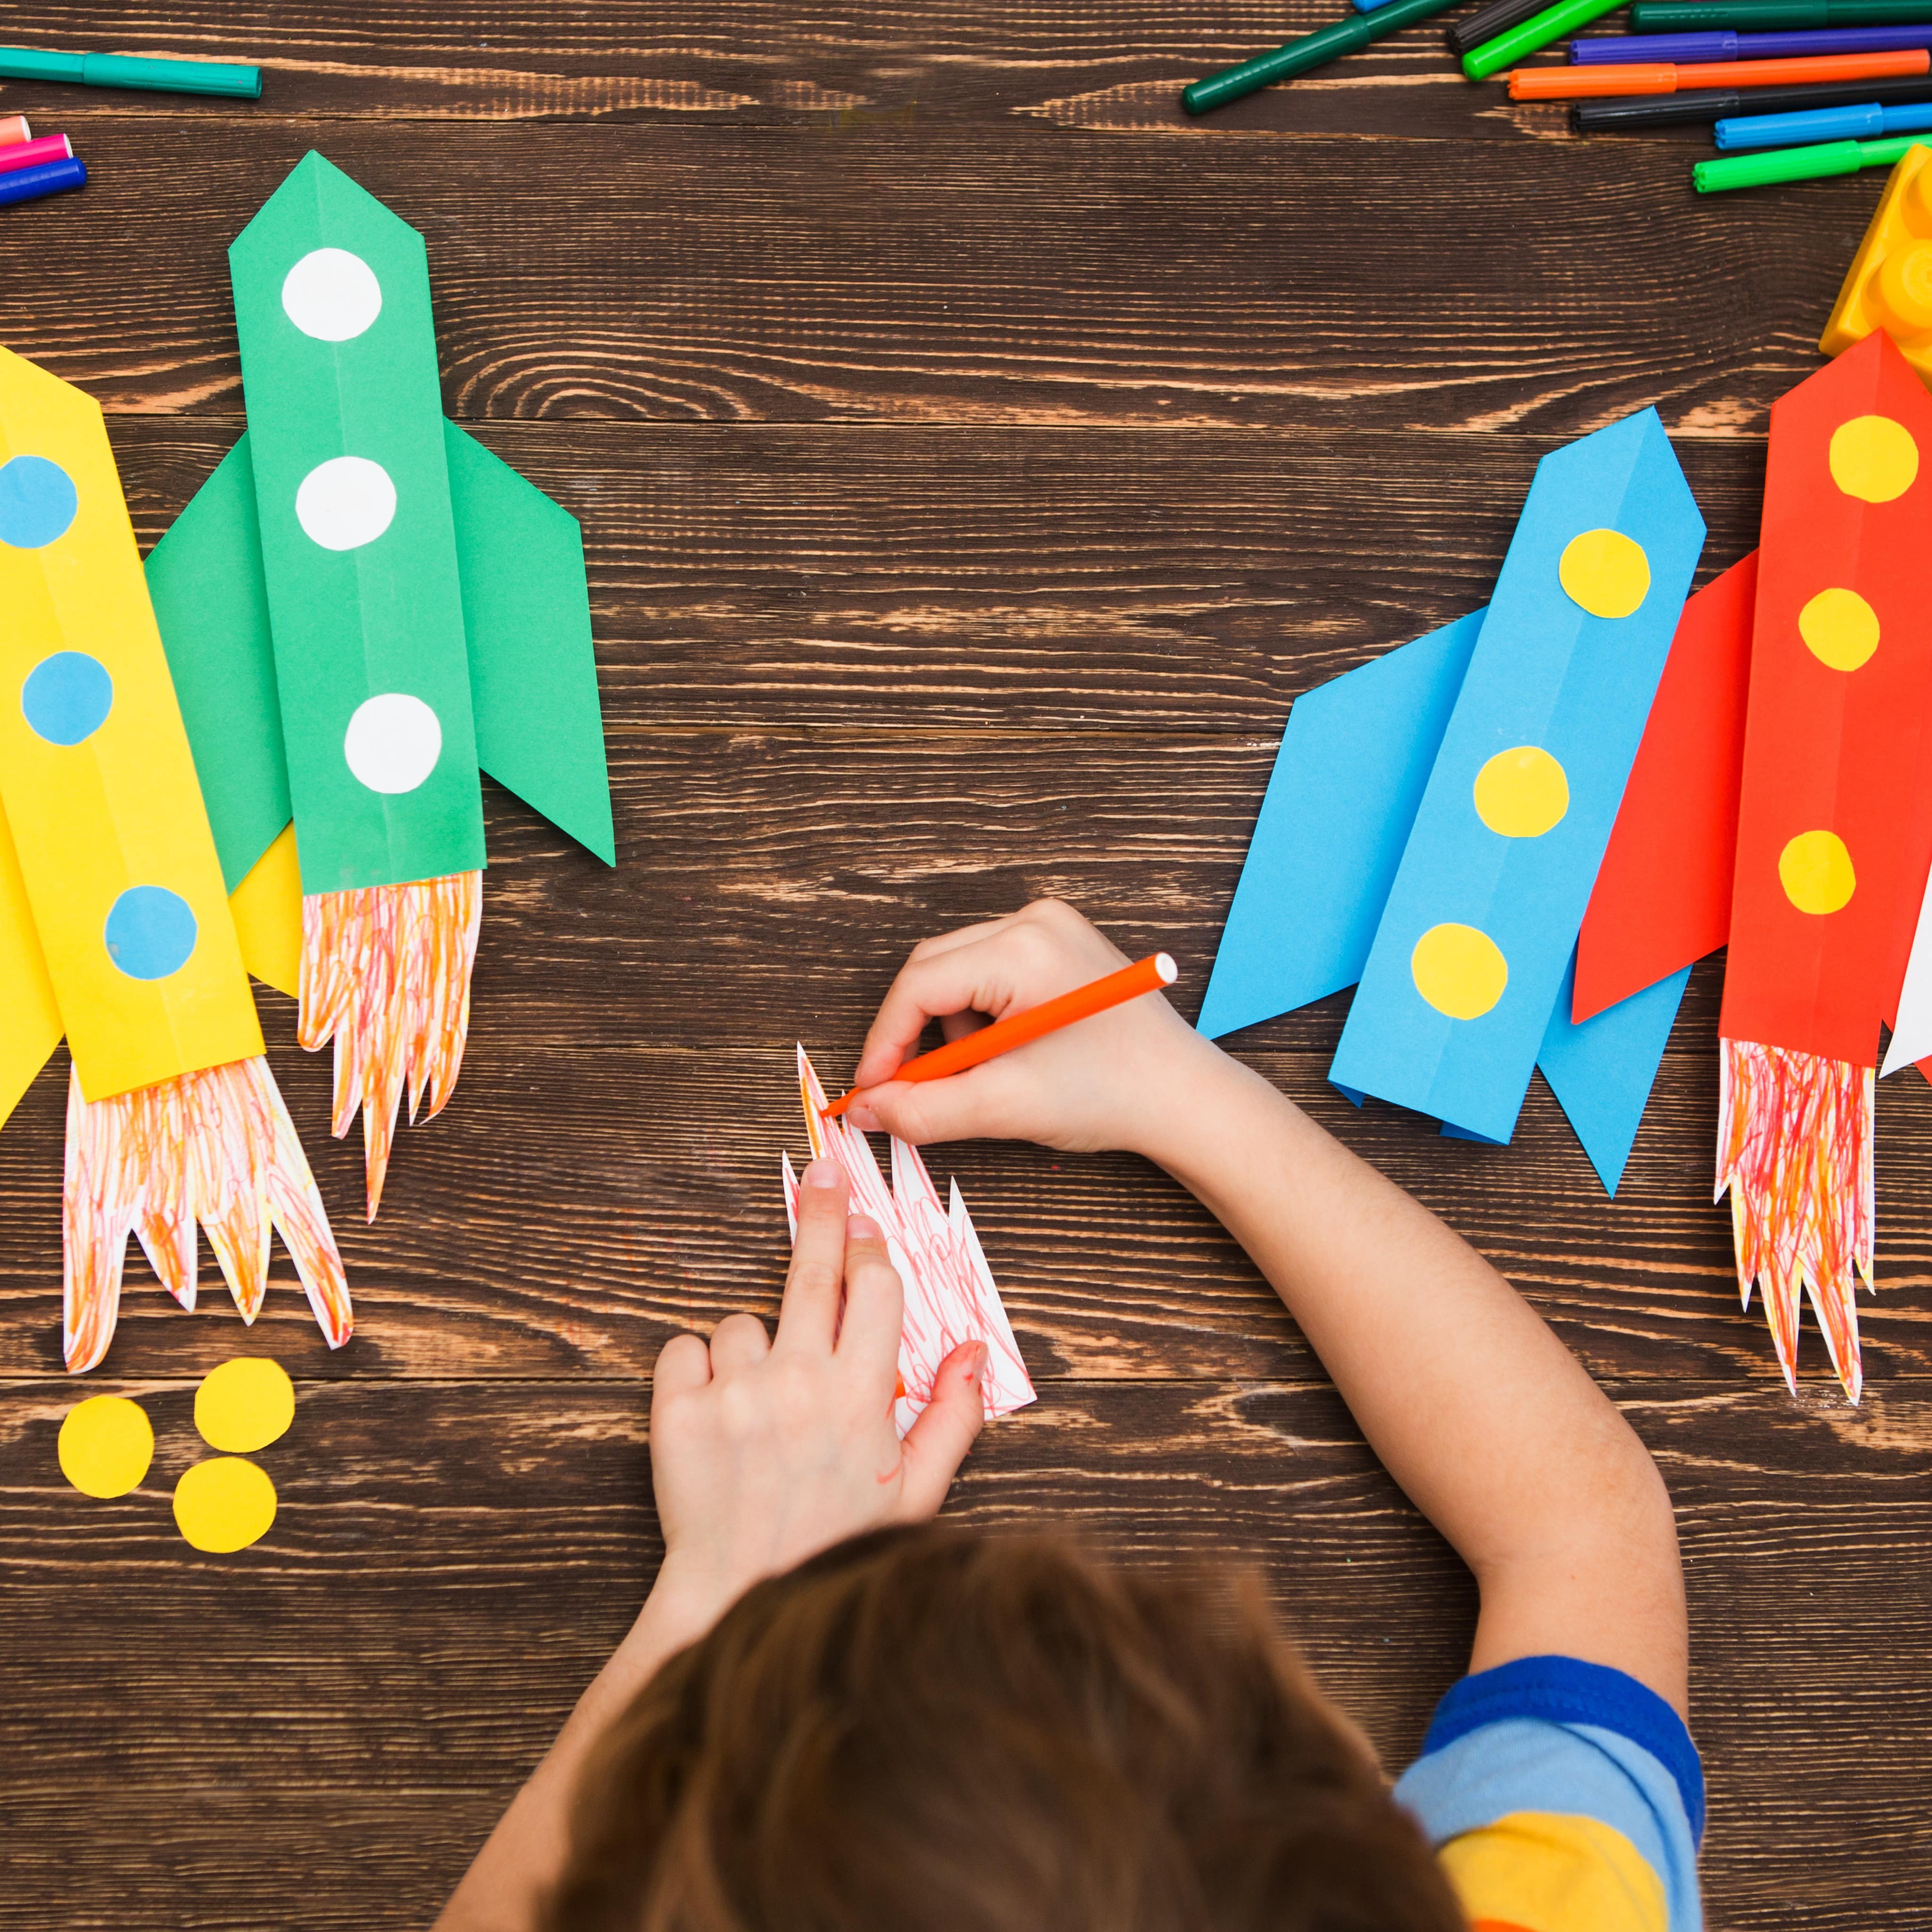 Child making colorful rockets from paper